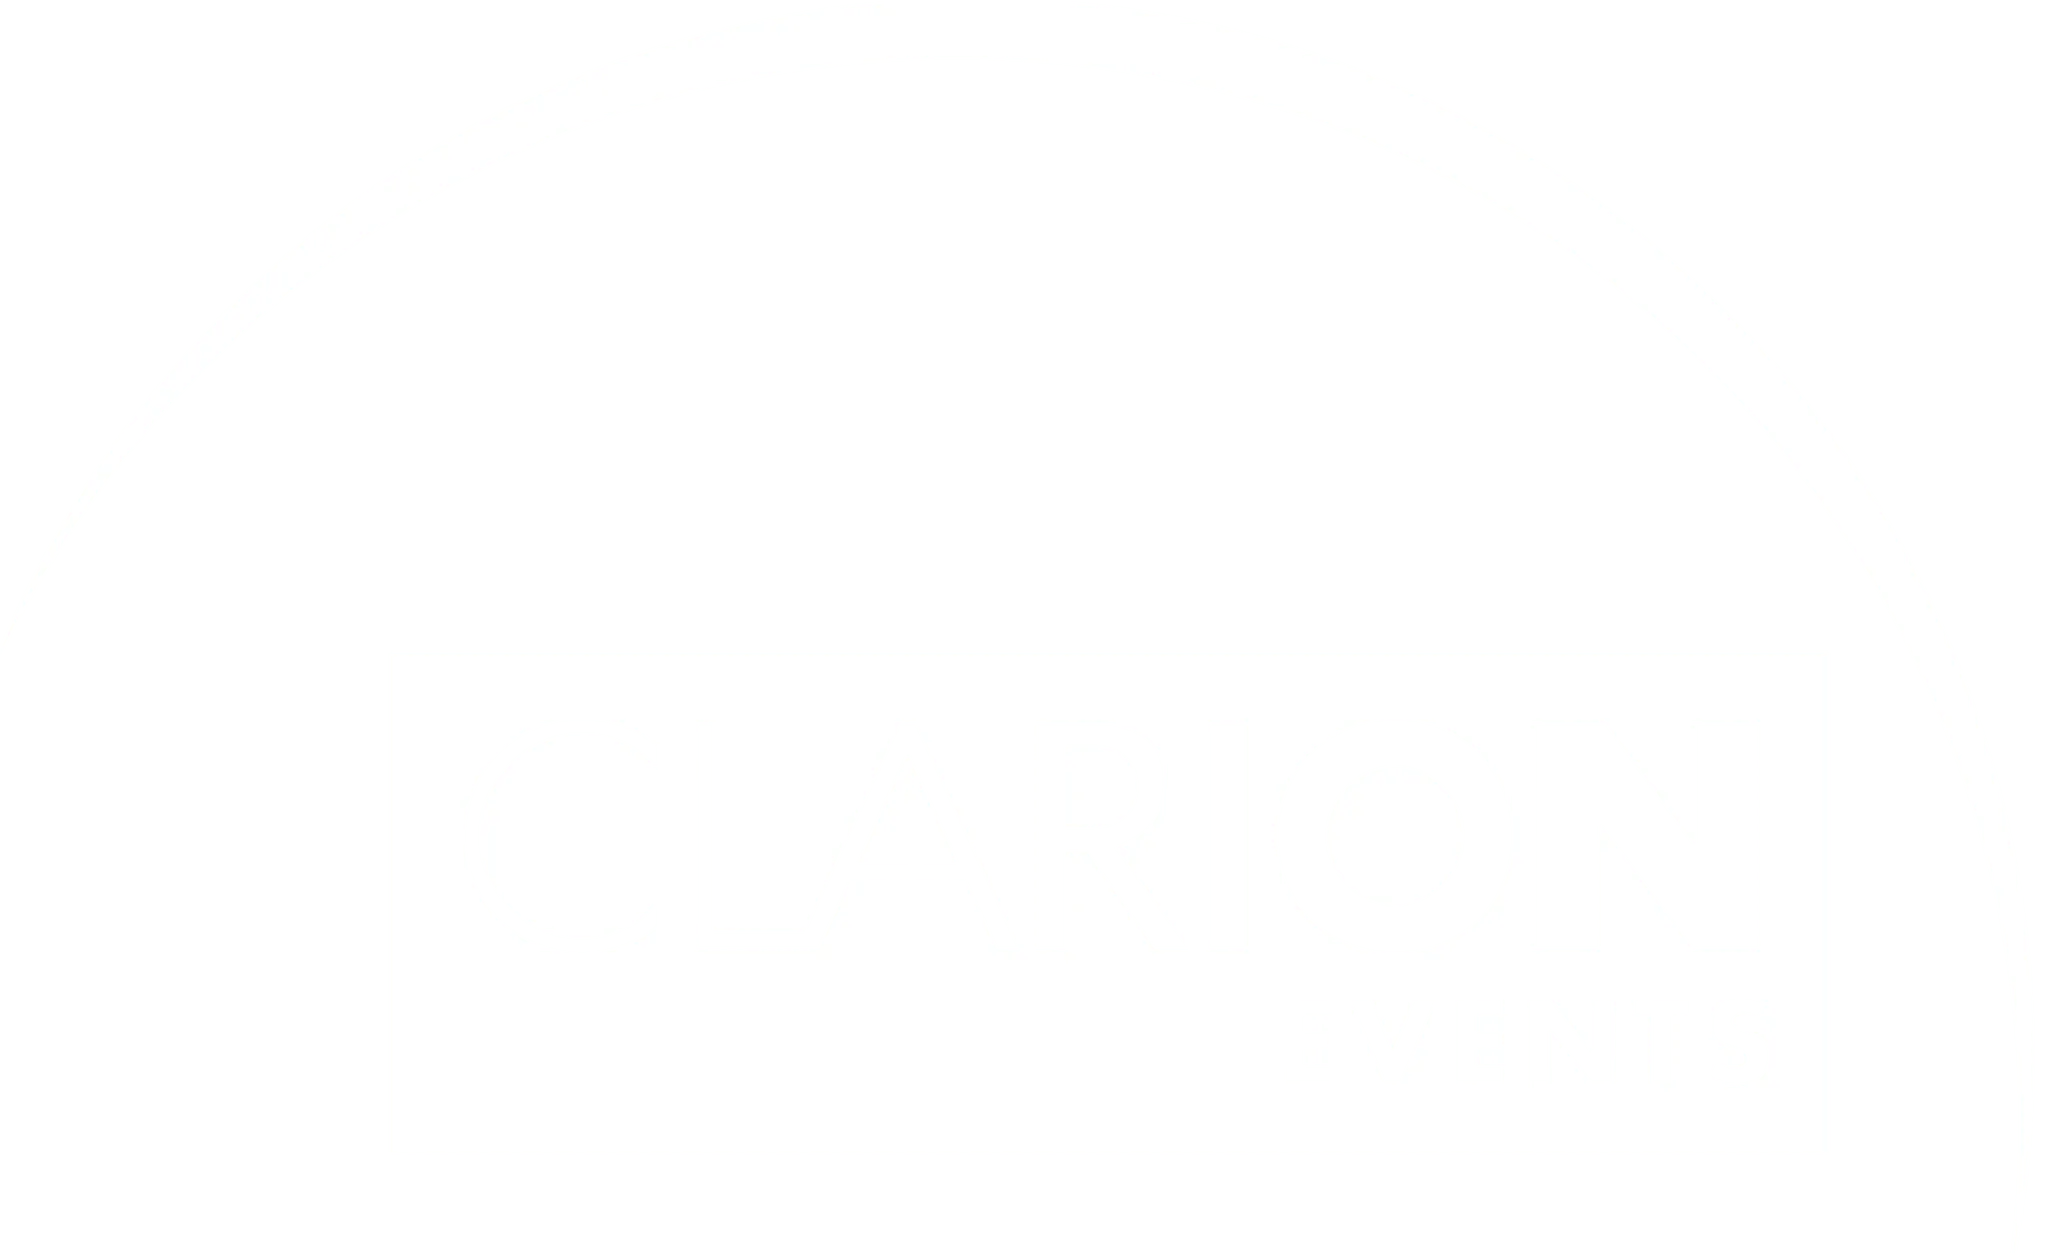 Clarion Events logo